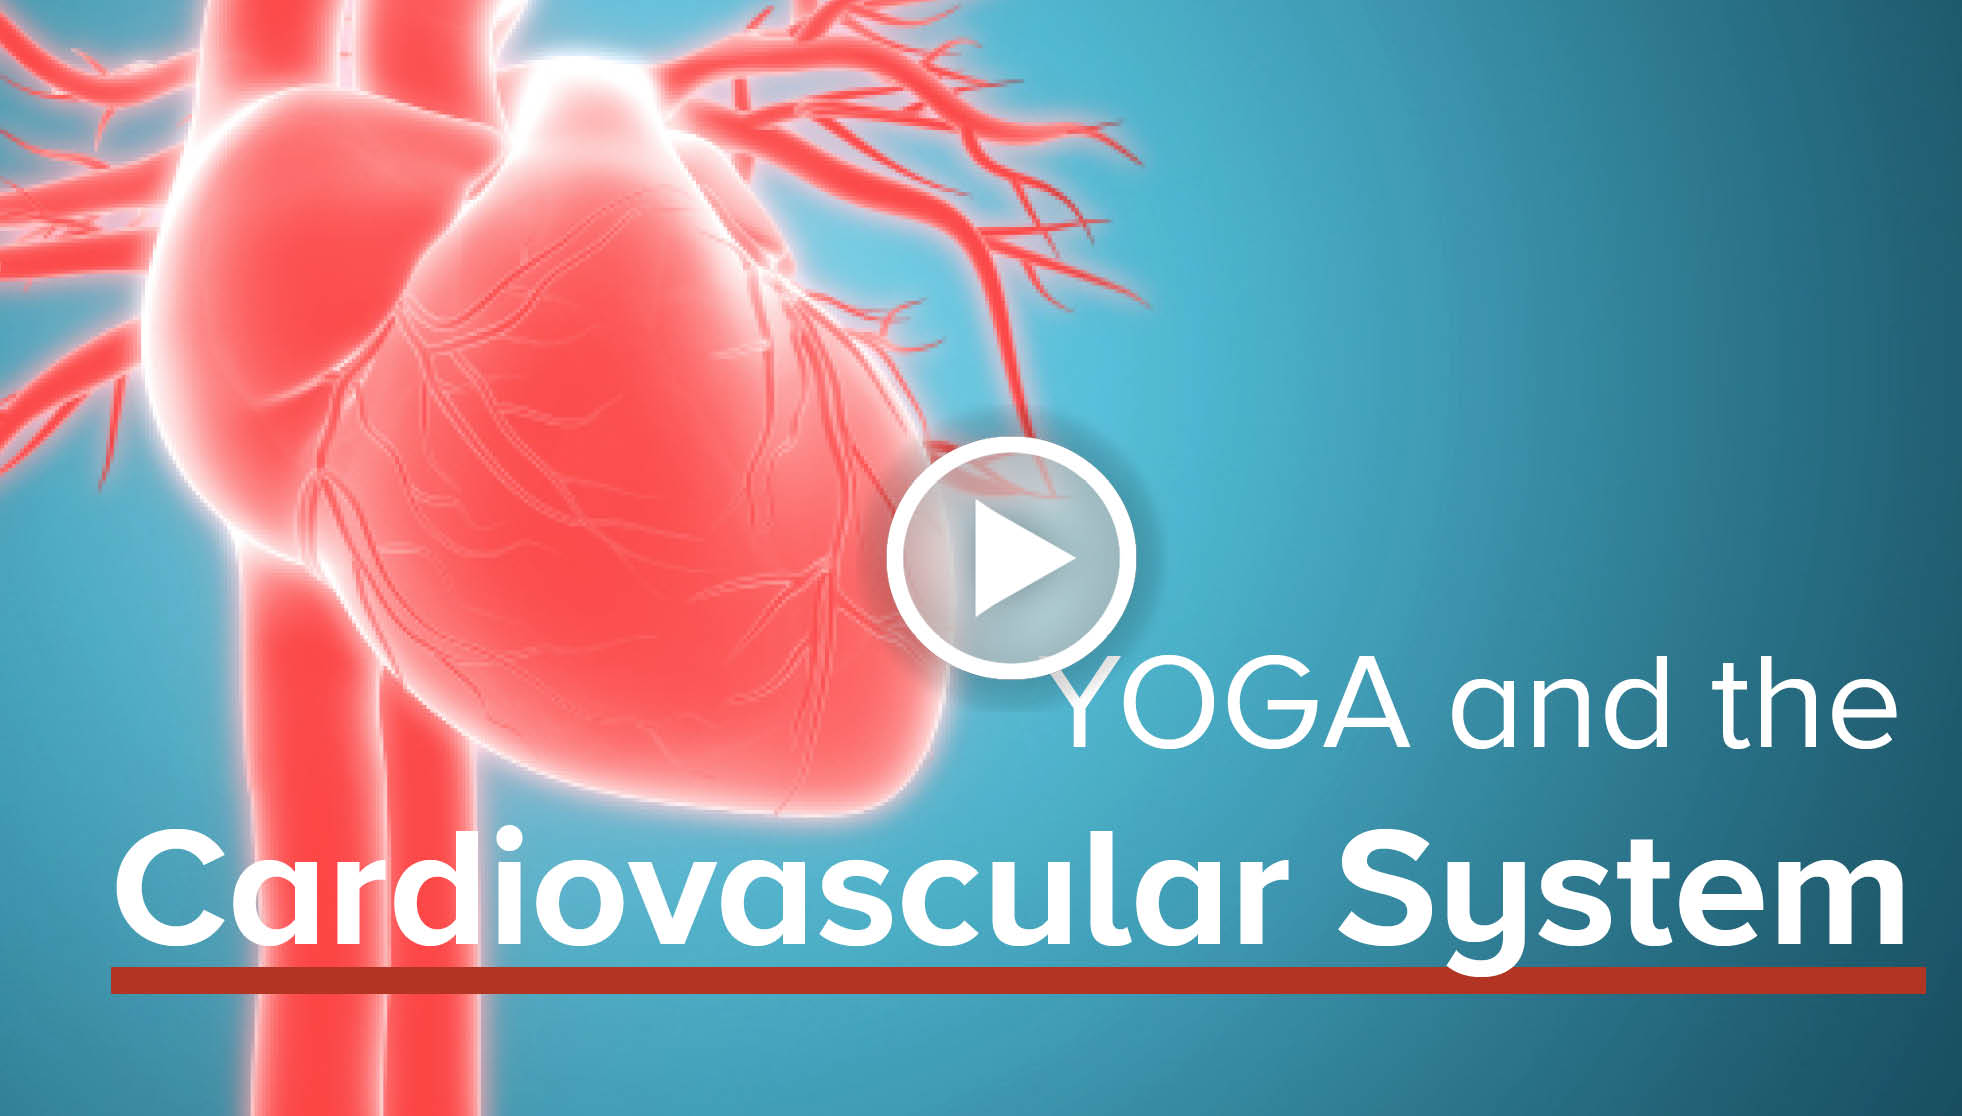 Yoga and the Cardiovascular System